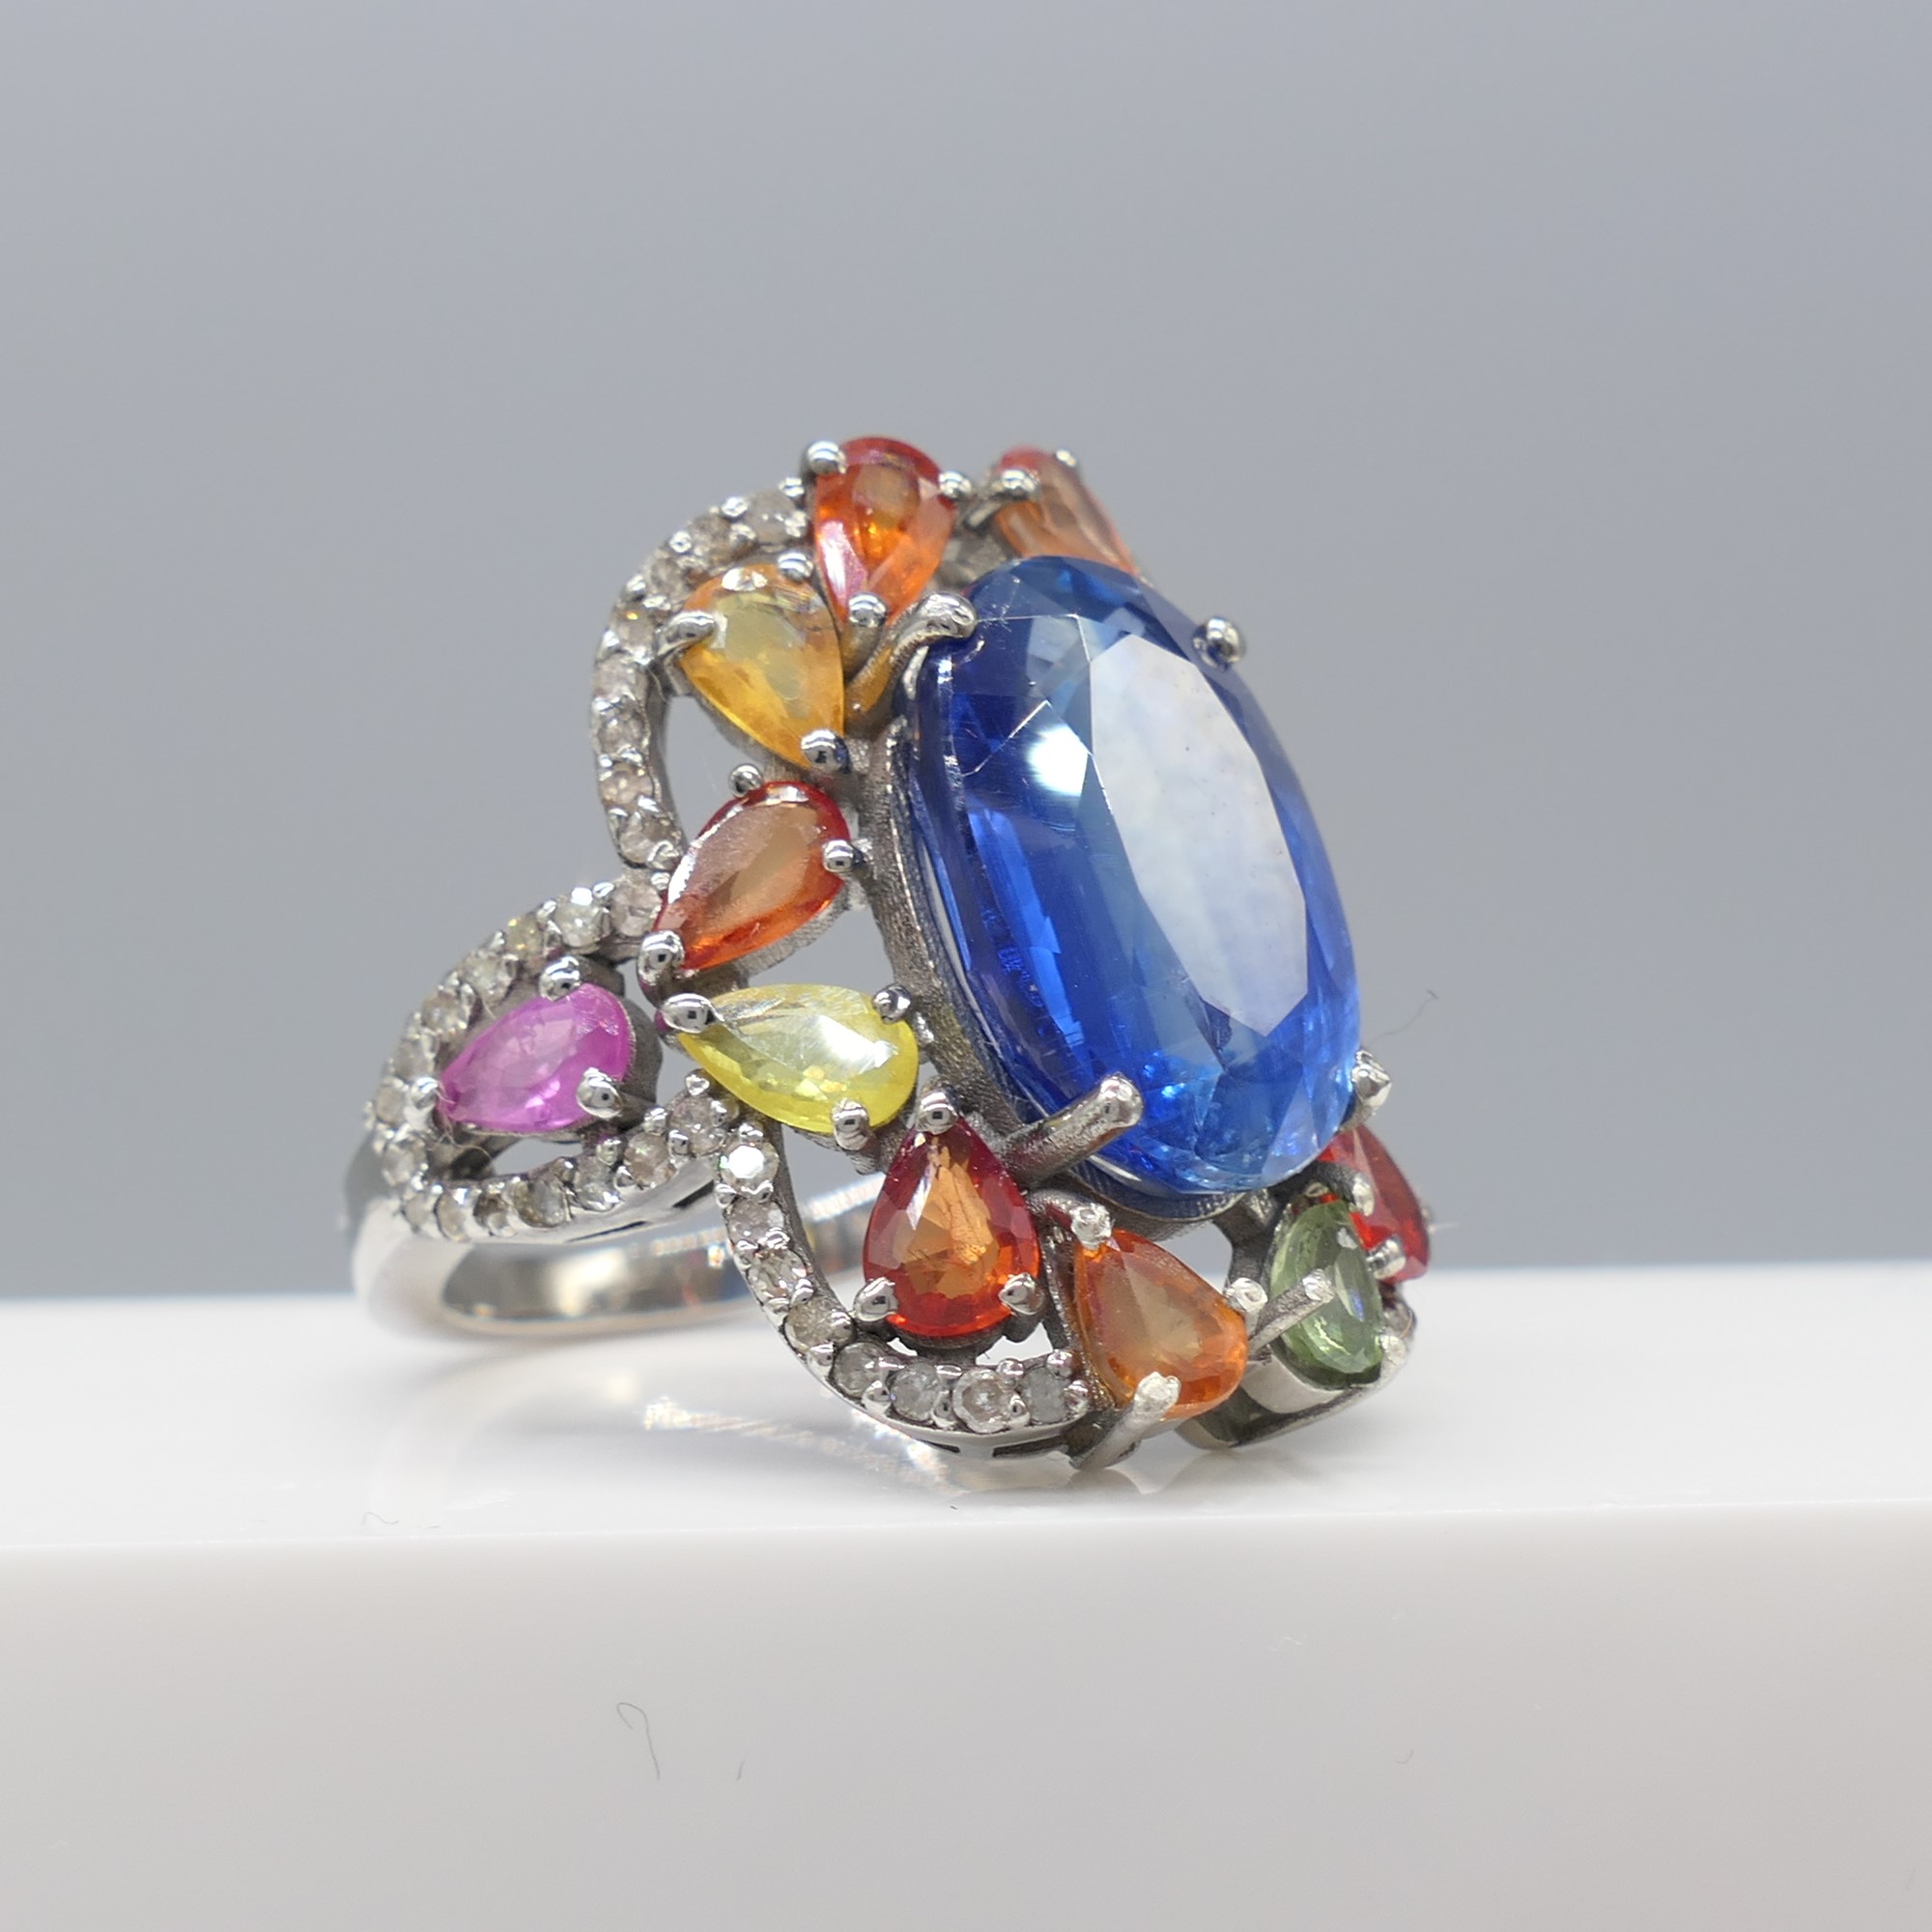 Large and Unusual Ring Featuring Kyanite; Multi-Coloured Sapphire and Diamonds, Boxed - Image 5 of 8